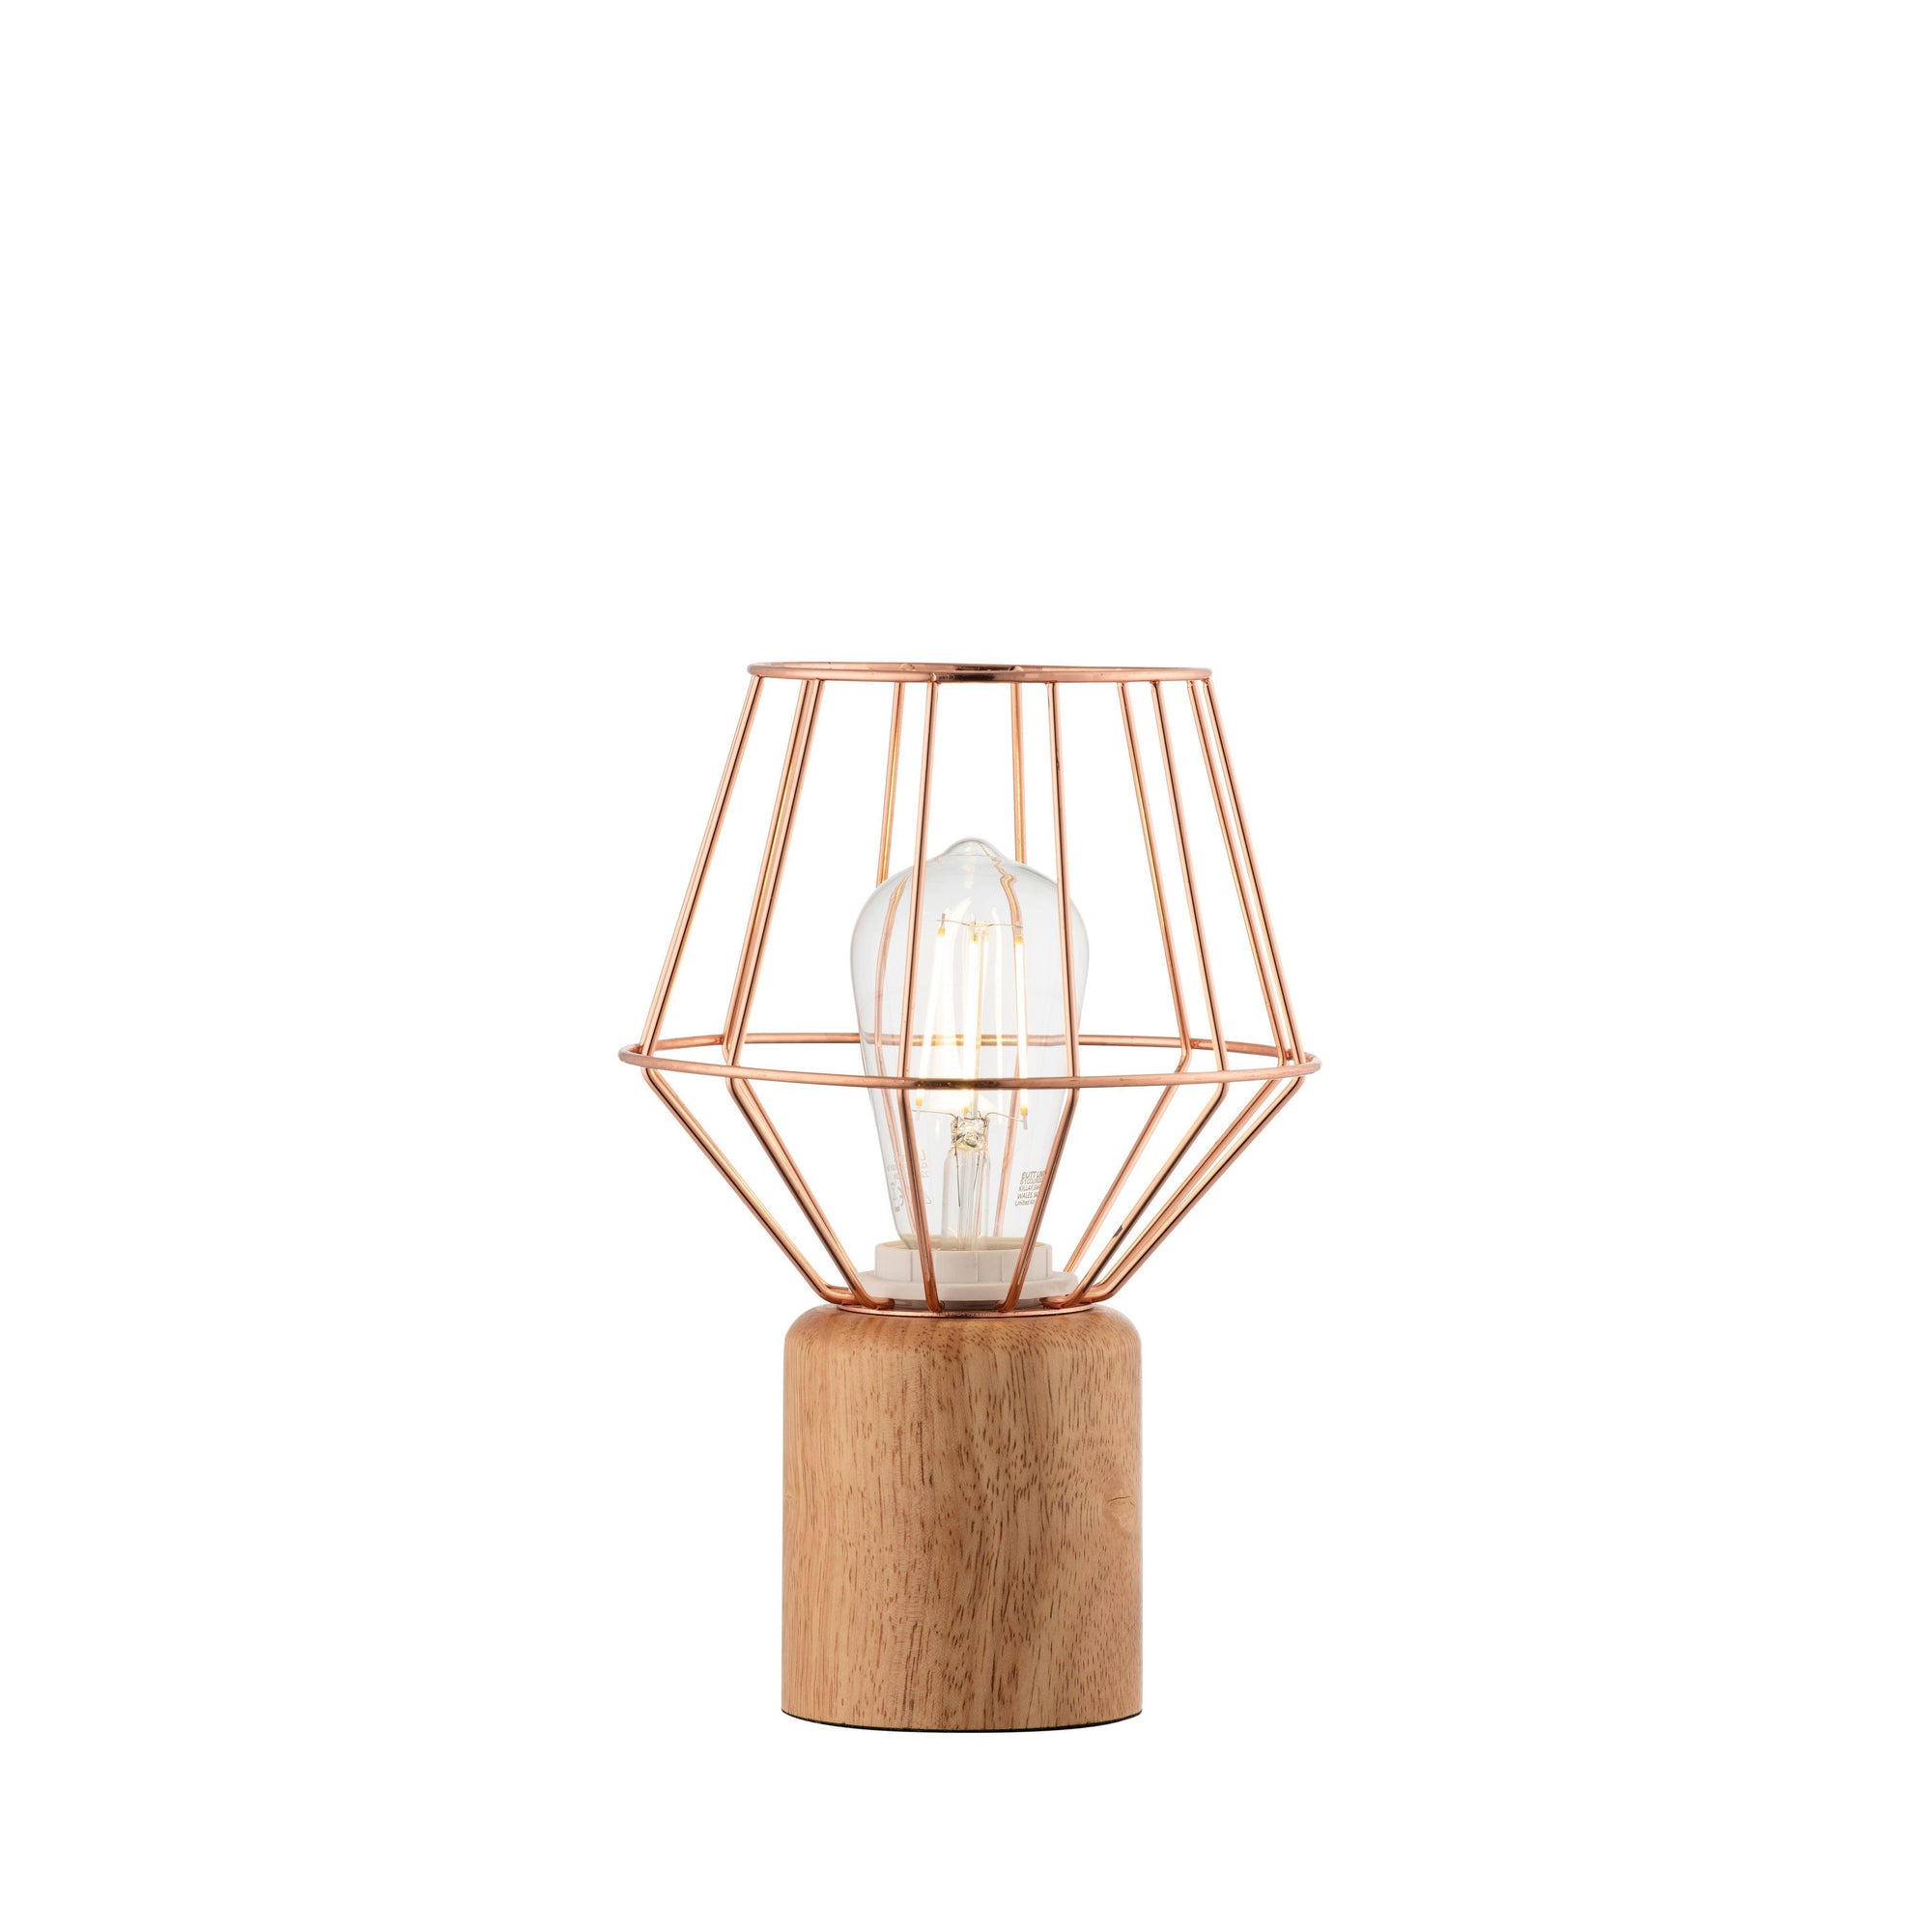 Wood and Copper Table Lamp - Galway Irish Crystal